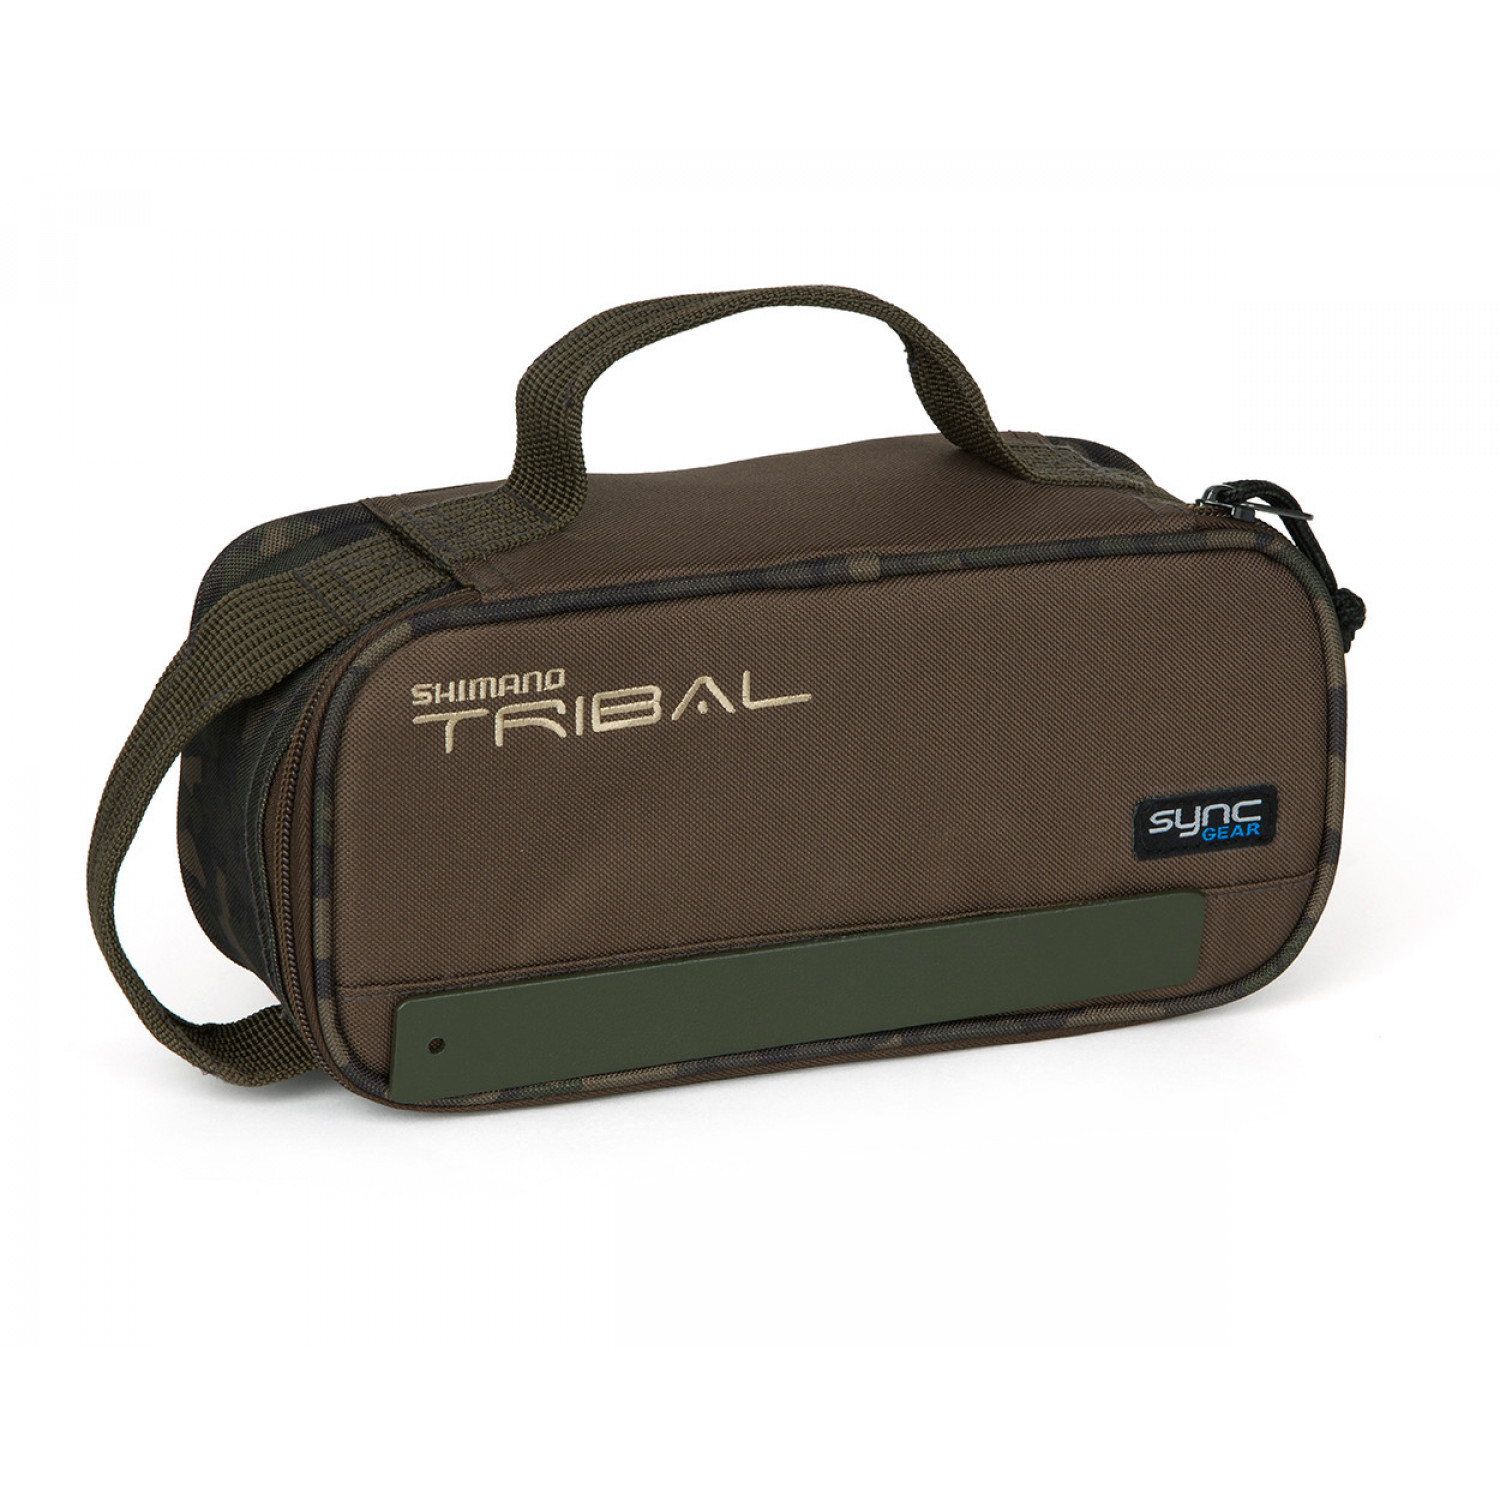 Shimano Tribal Sync Magnetic Security Case, SHTSC05